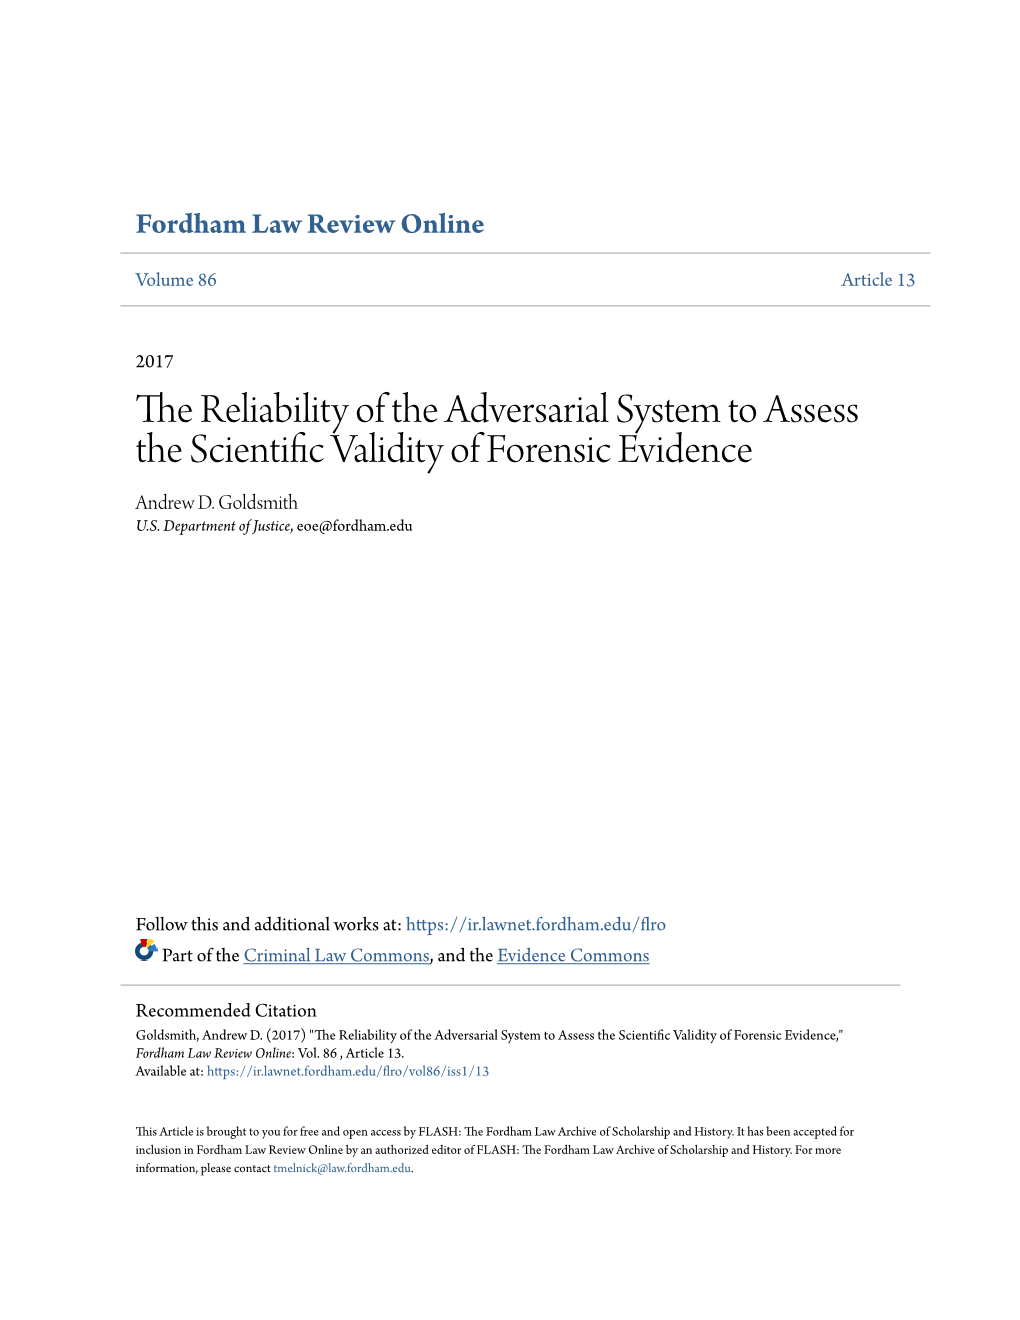 The Reliability of the Adversarial System to Assess the Scientific Aliditv Y of Forensic Evidence Andrew D